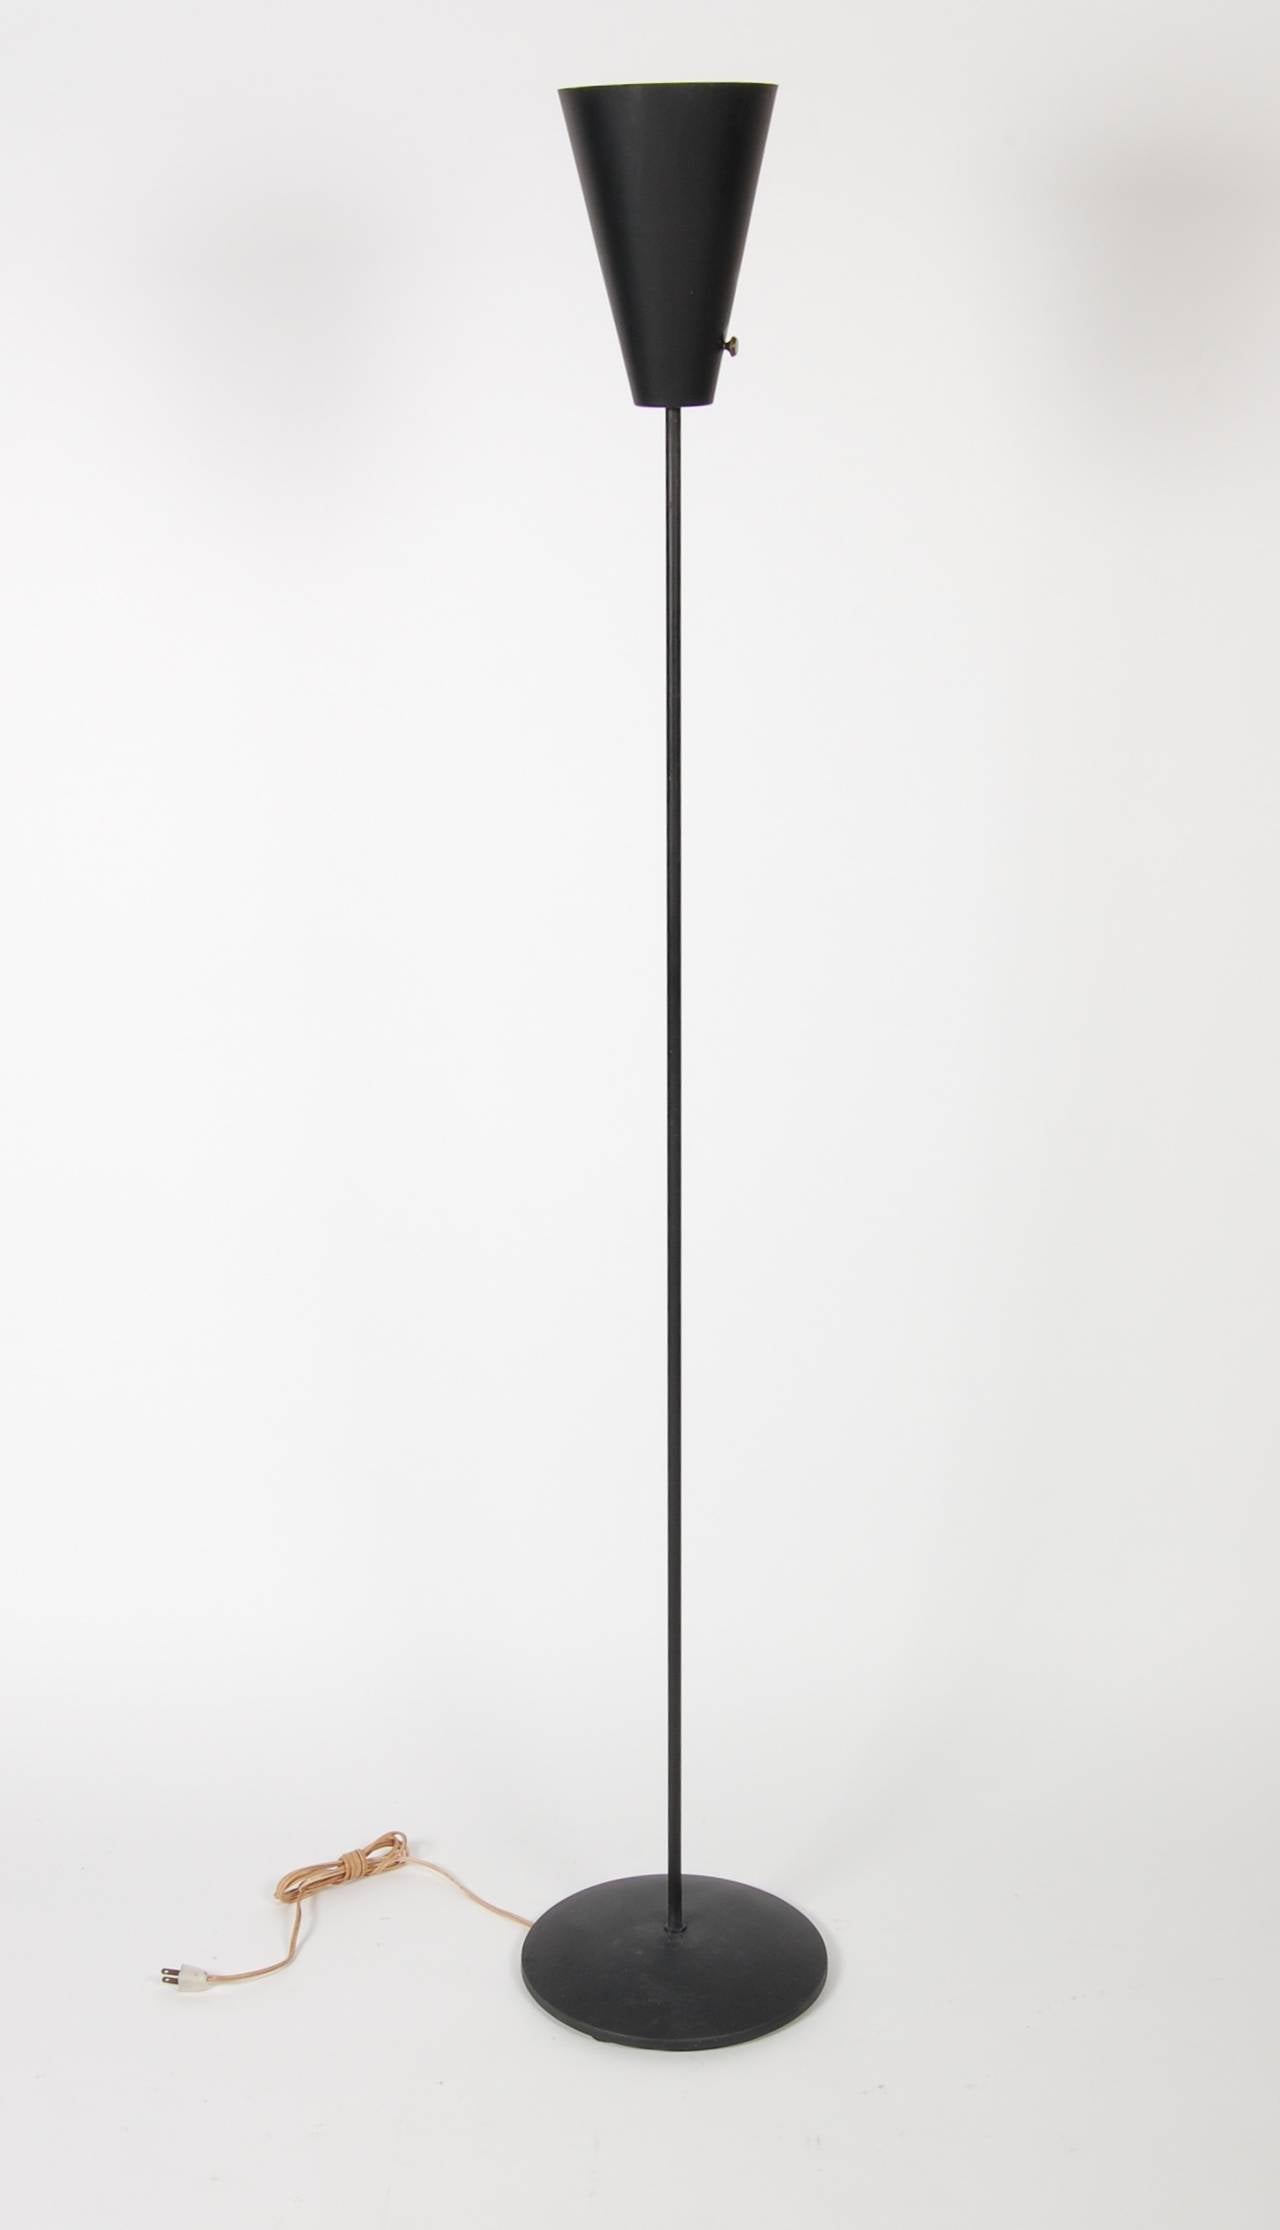 Produced in the early 1950s by the Berkeley company Prescolite, this torchiere floor lamp evokes the design credo of the Case Study House program of the period. Sleek and modern for its day. Original mat black finish, thin stem and the cone with a